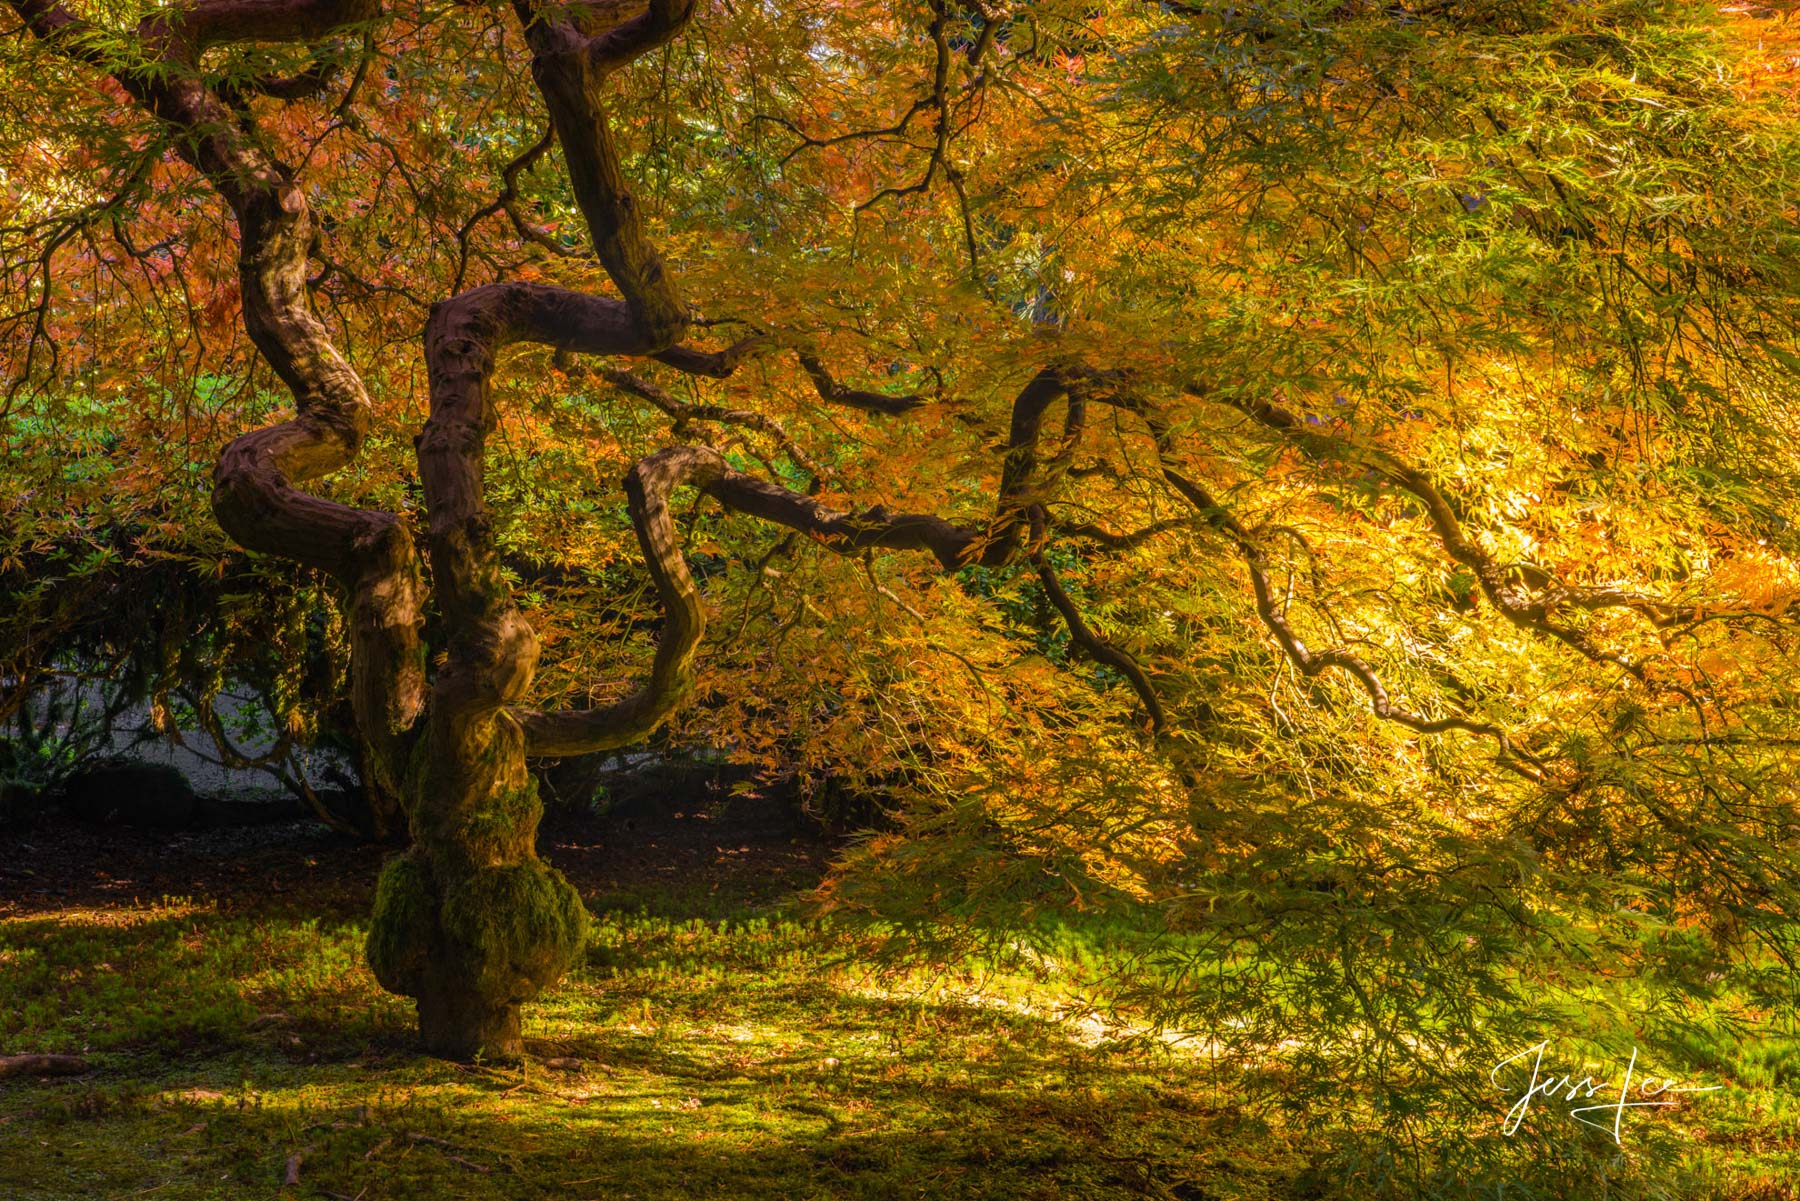 Photographic Prints of the Golden Glow of this famous Maple in the Portland Japanese Garden, , Fabulous photography, best photo...